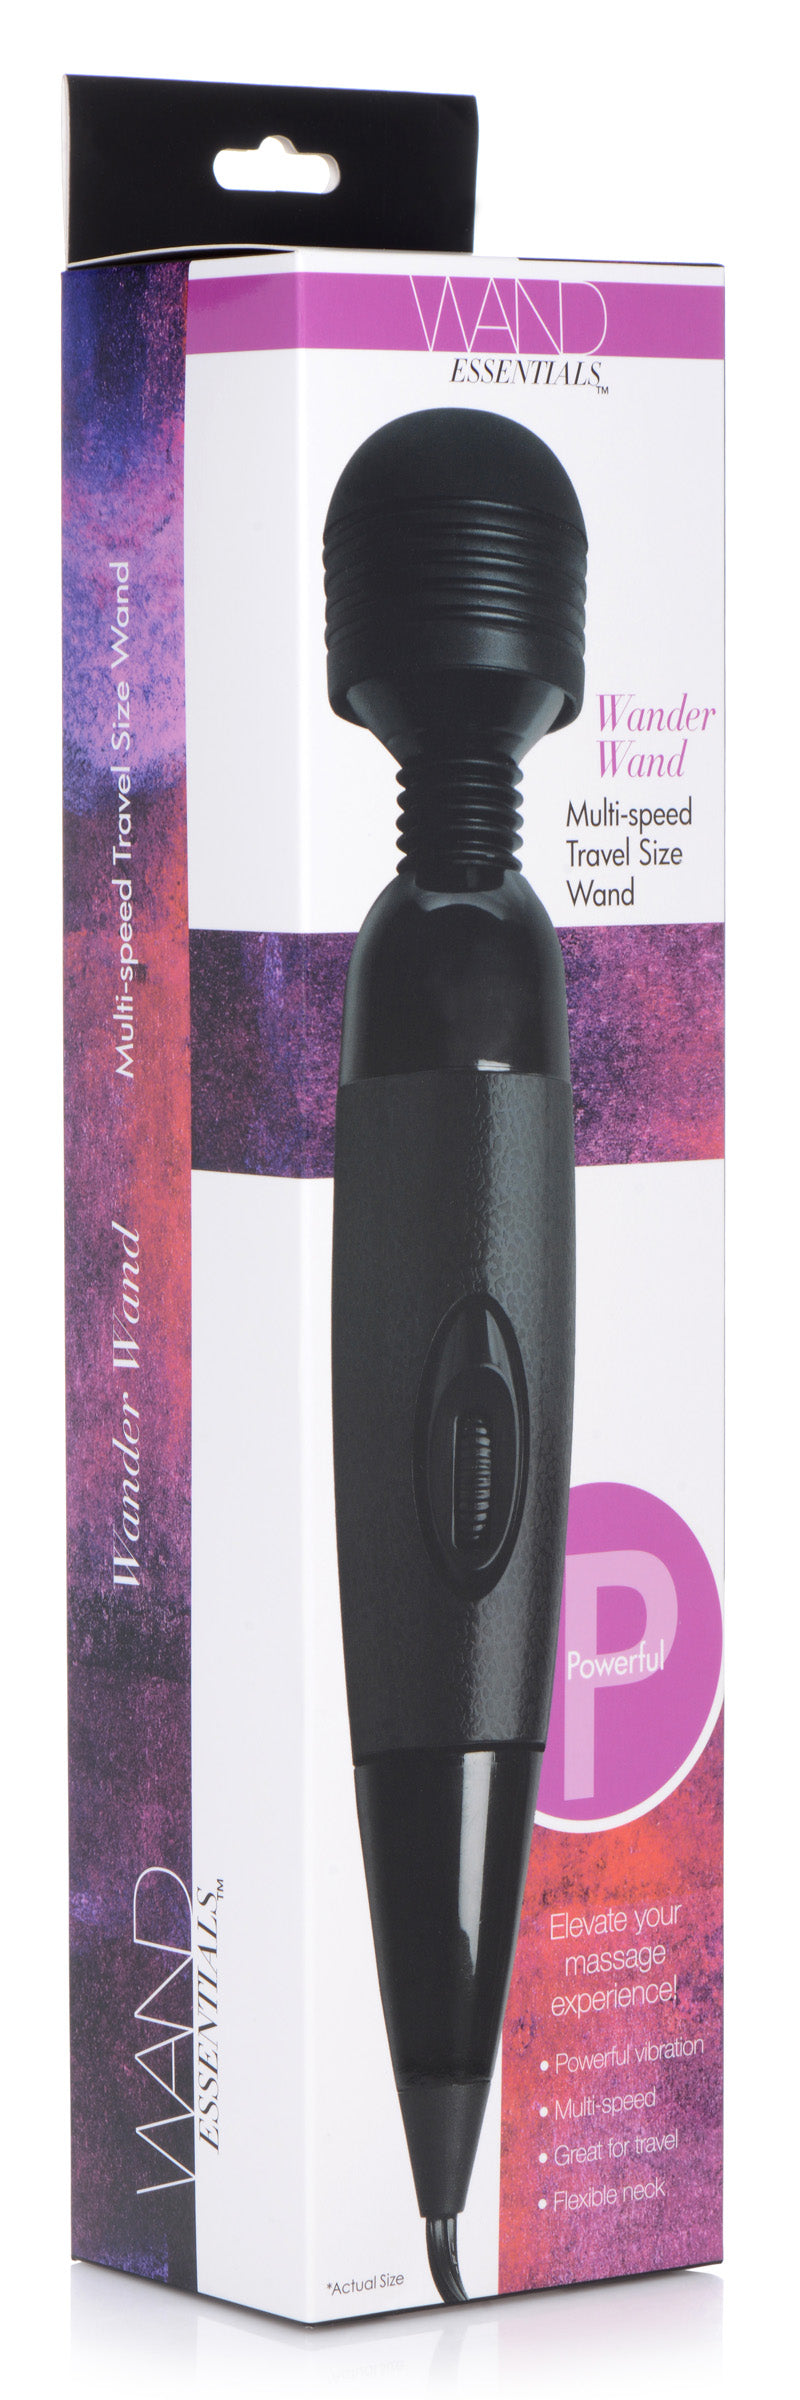 Wander Wand Multi-Speed Travel Size Wand massagers-small from Wand Essentials